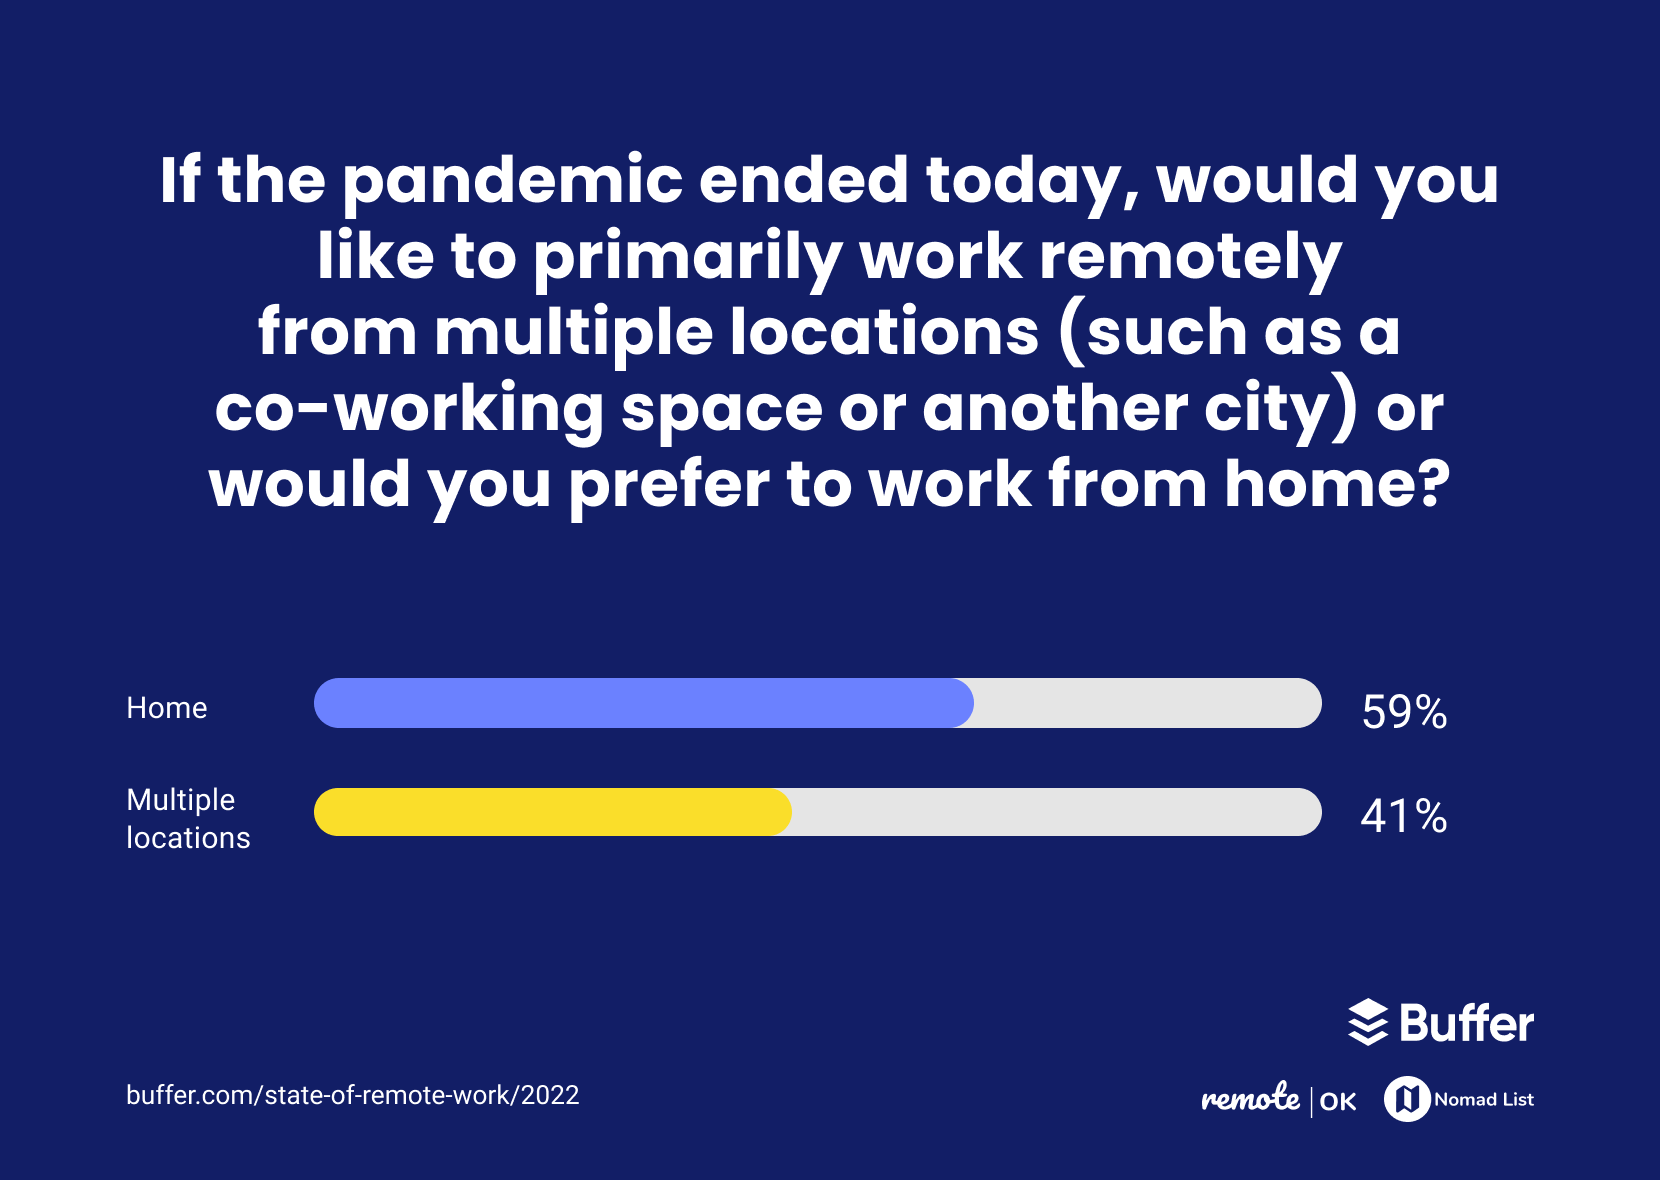 If the pandemic ended today, would you like to primarily work remotely from multiple locations (such as a co-working space or another city) or would you prefer to work from home?